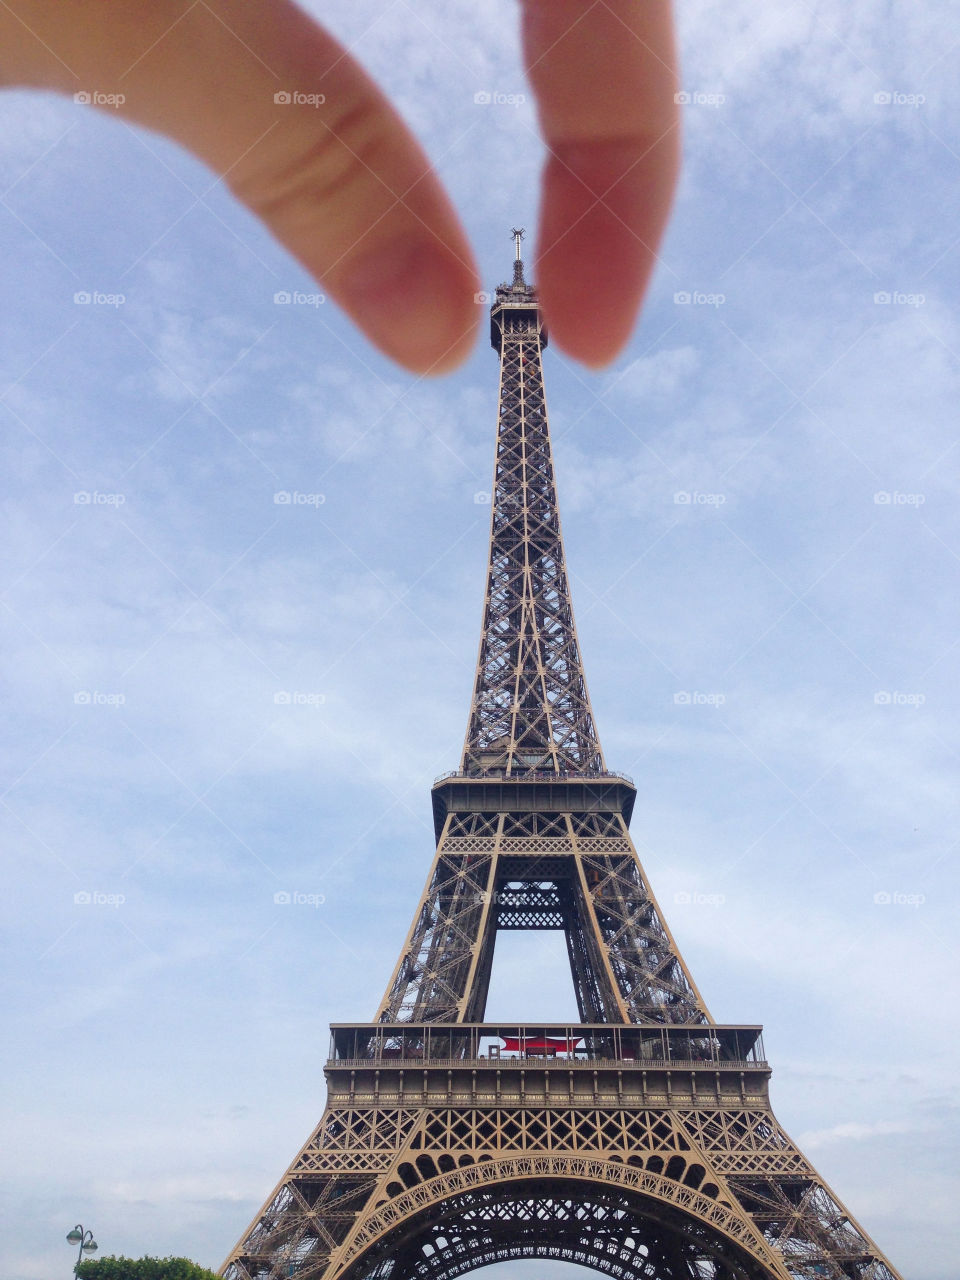 Person's hand grabbing the tower